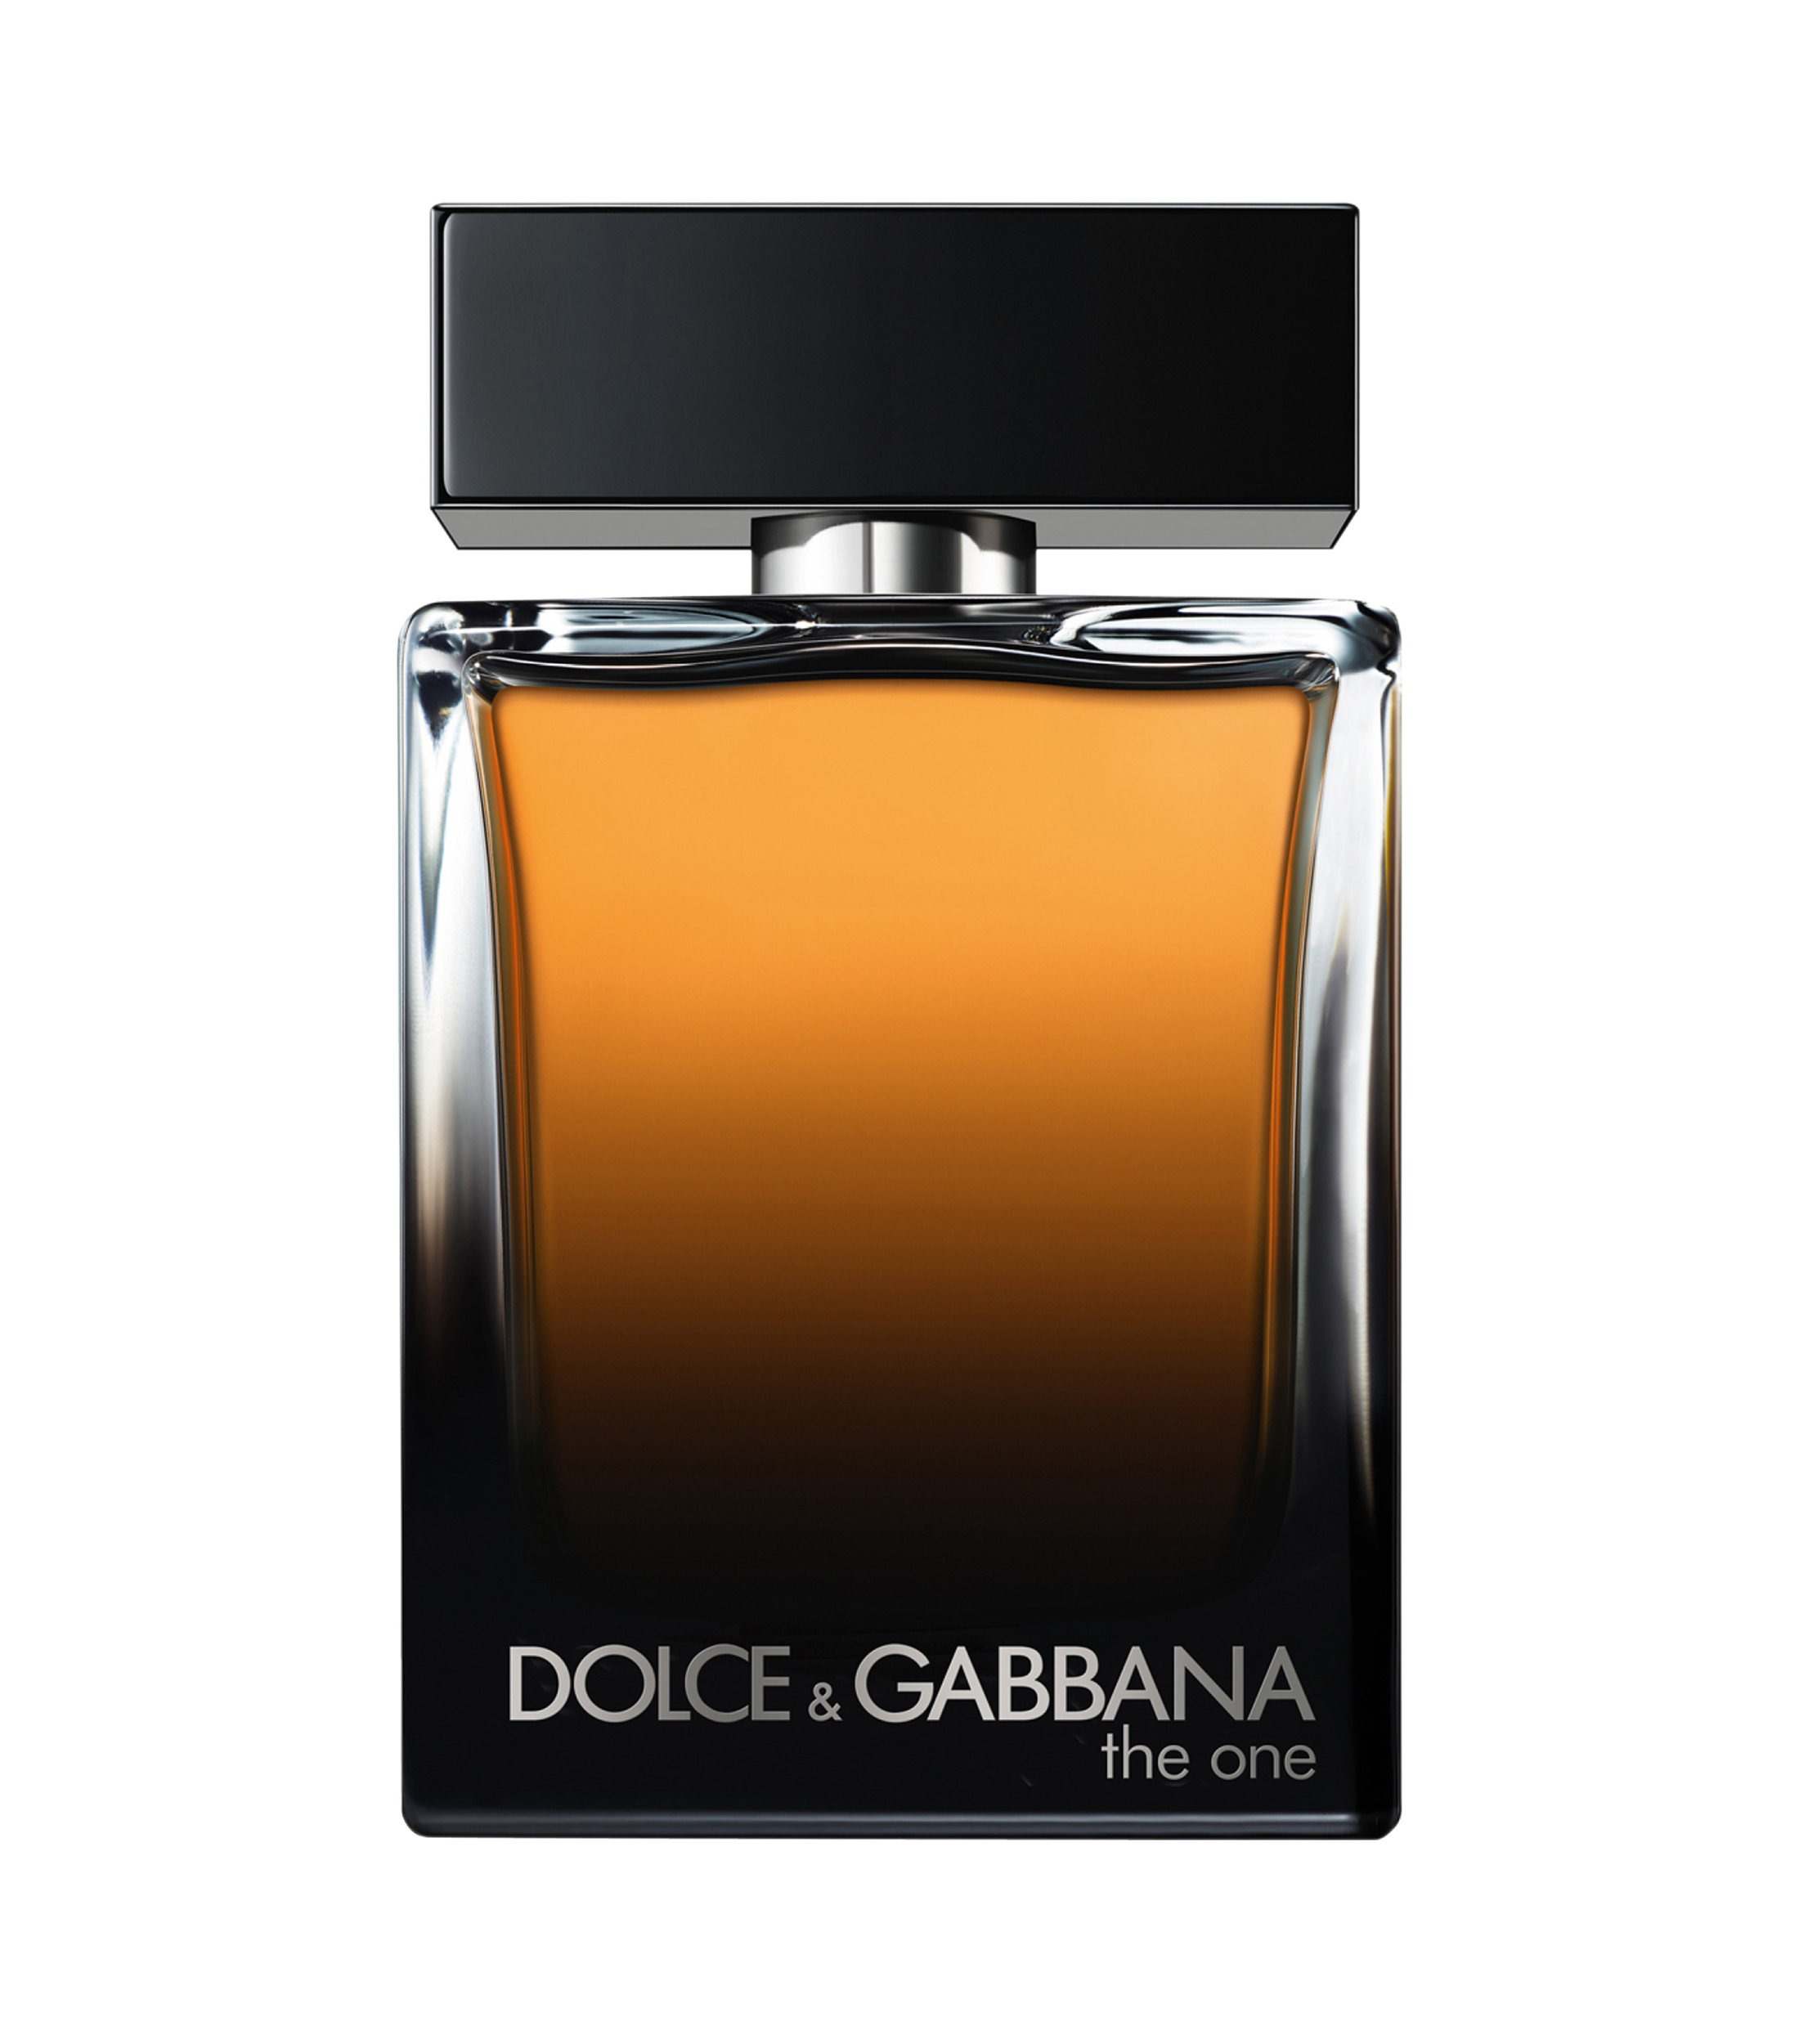 Dolce gabbana the one edp grape seed extract gnc